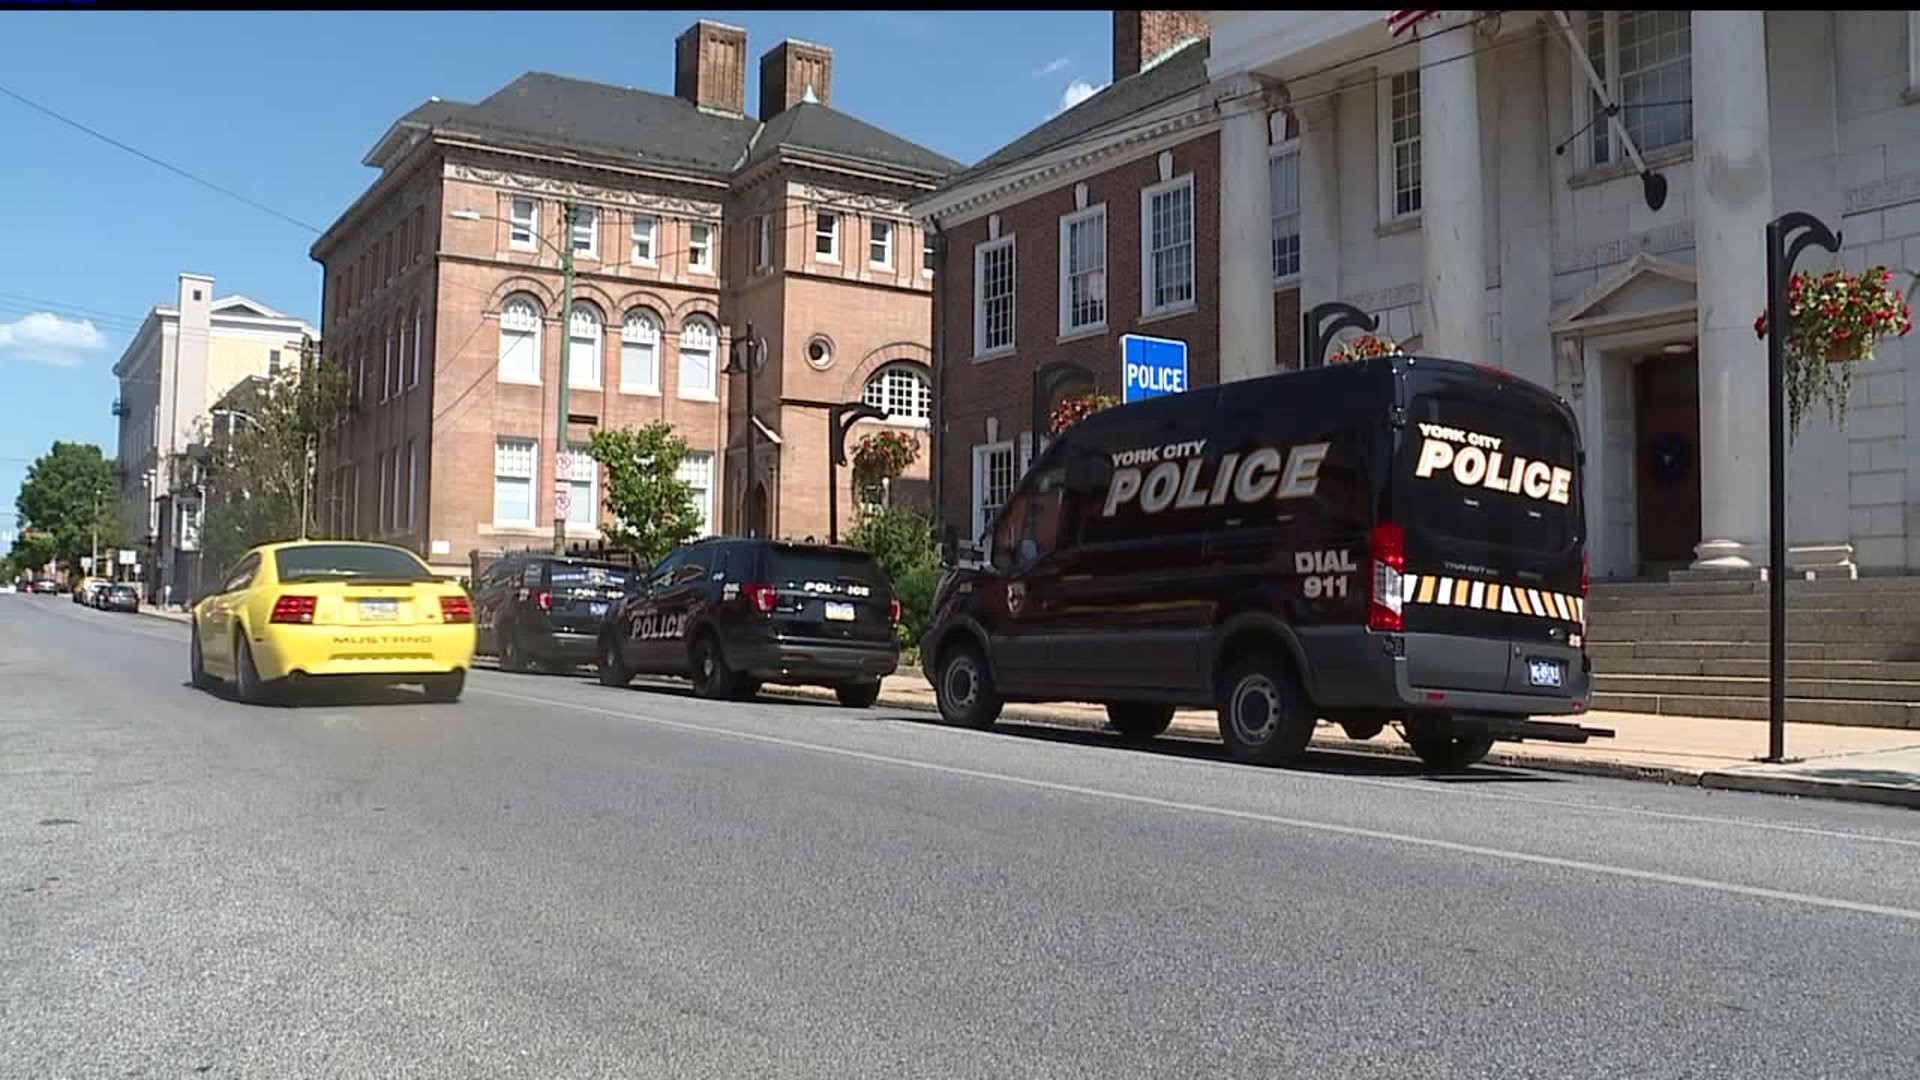 York City Police looking to hire more diverse officers